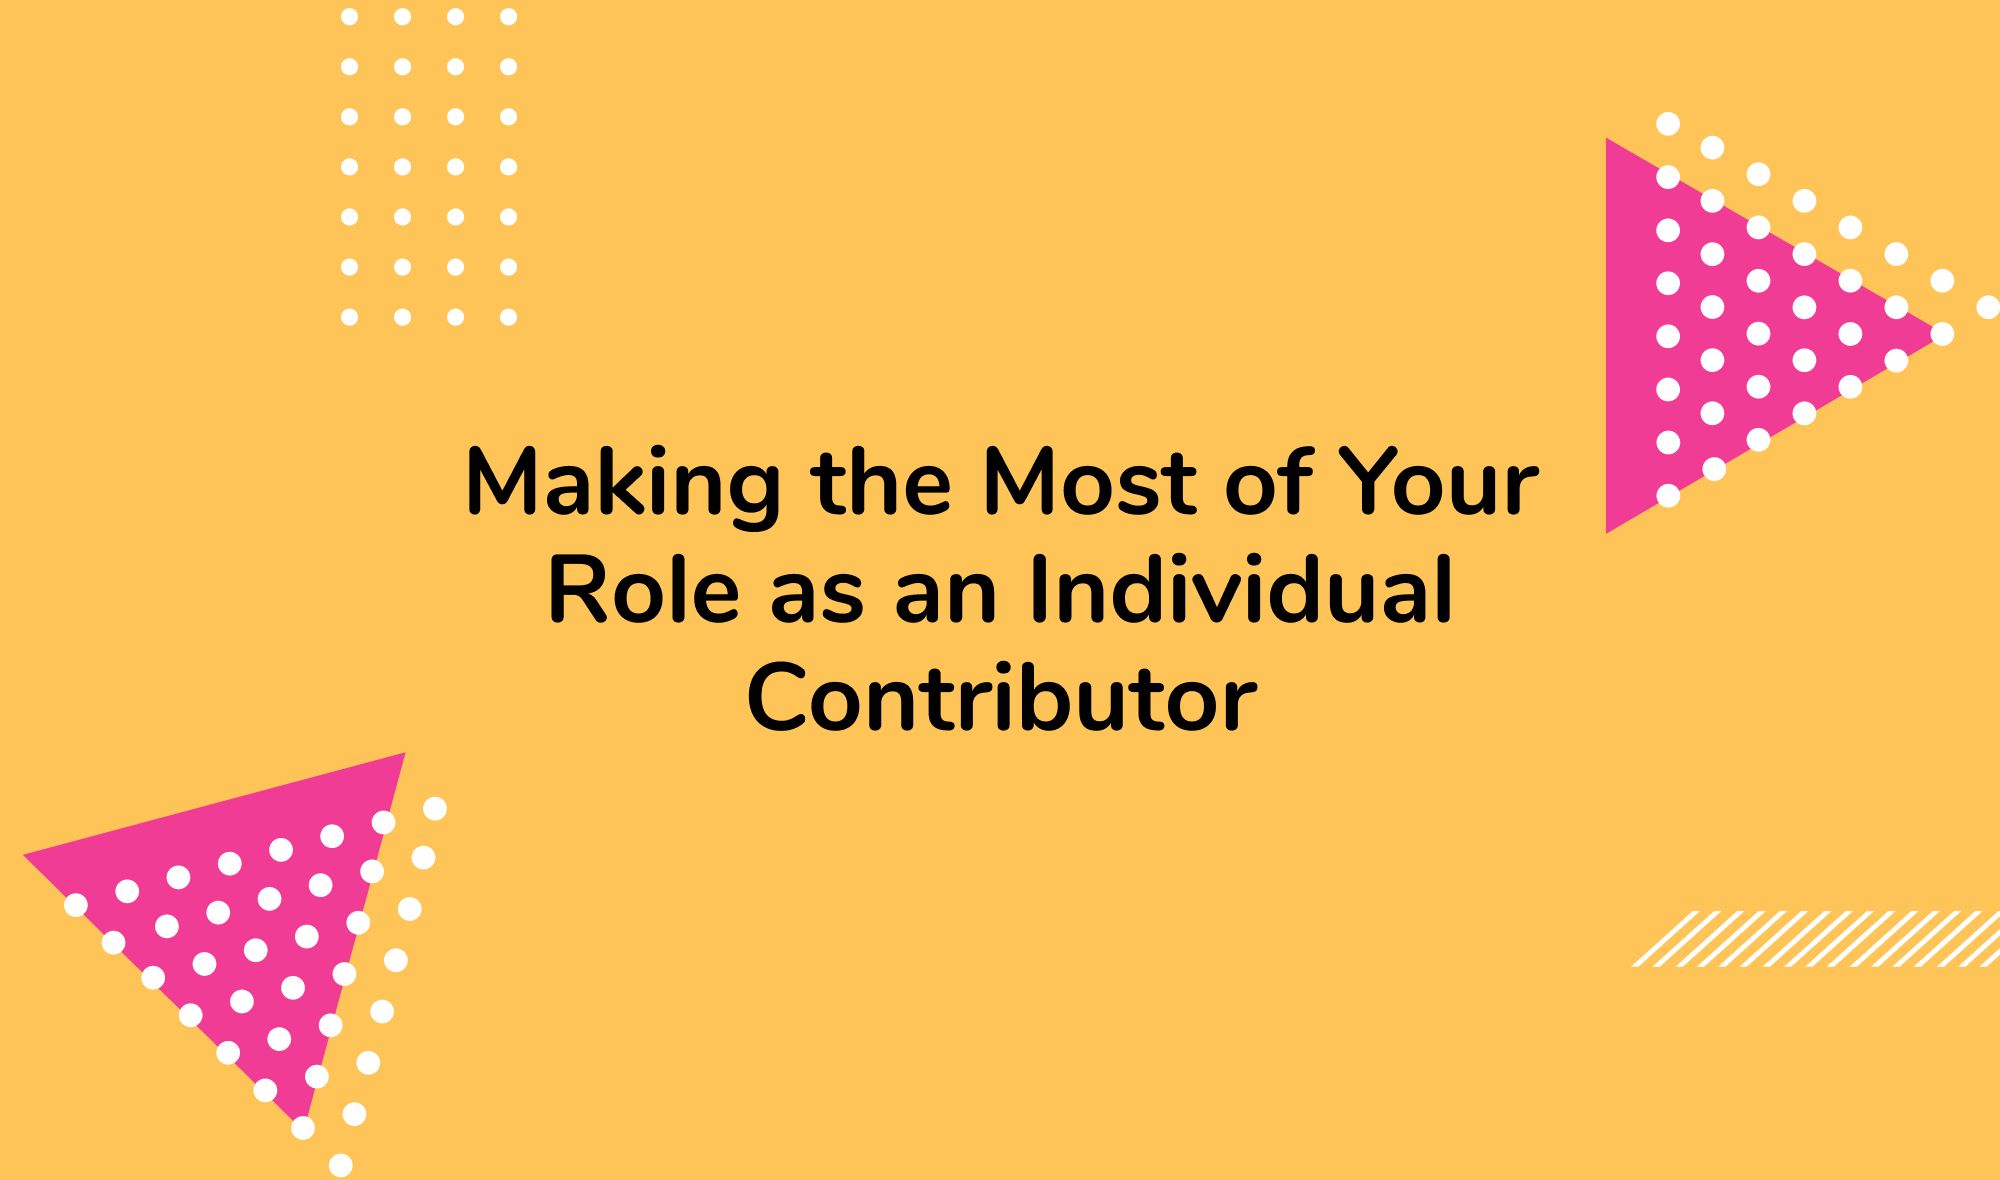 Making the Most of Your Role as an Individual Contributor